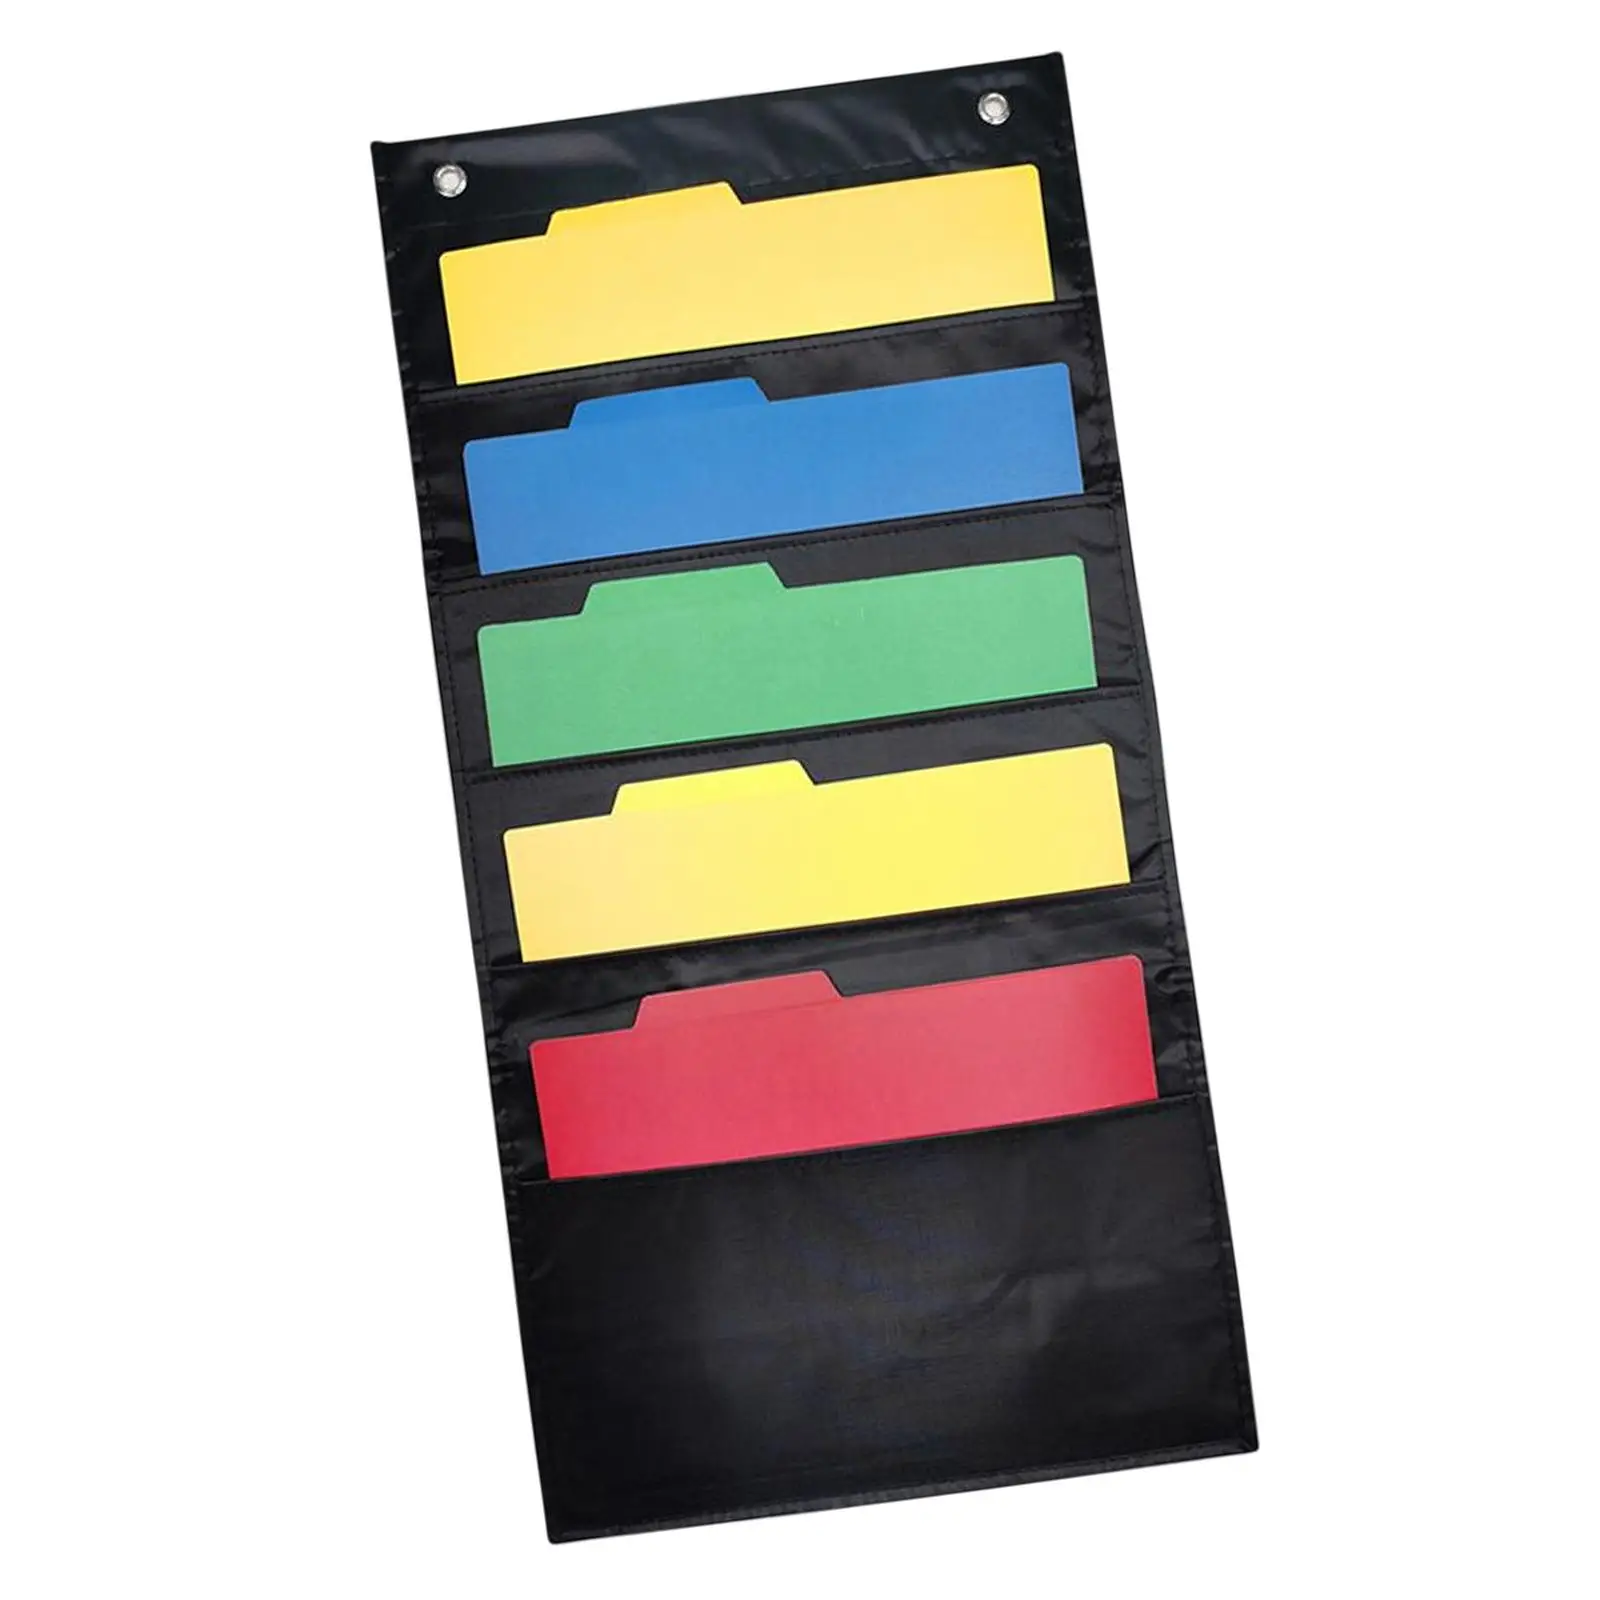 Hanging Daily Schedule Pocket Chart File Organizer Storage Bag 5 Pockets for